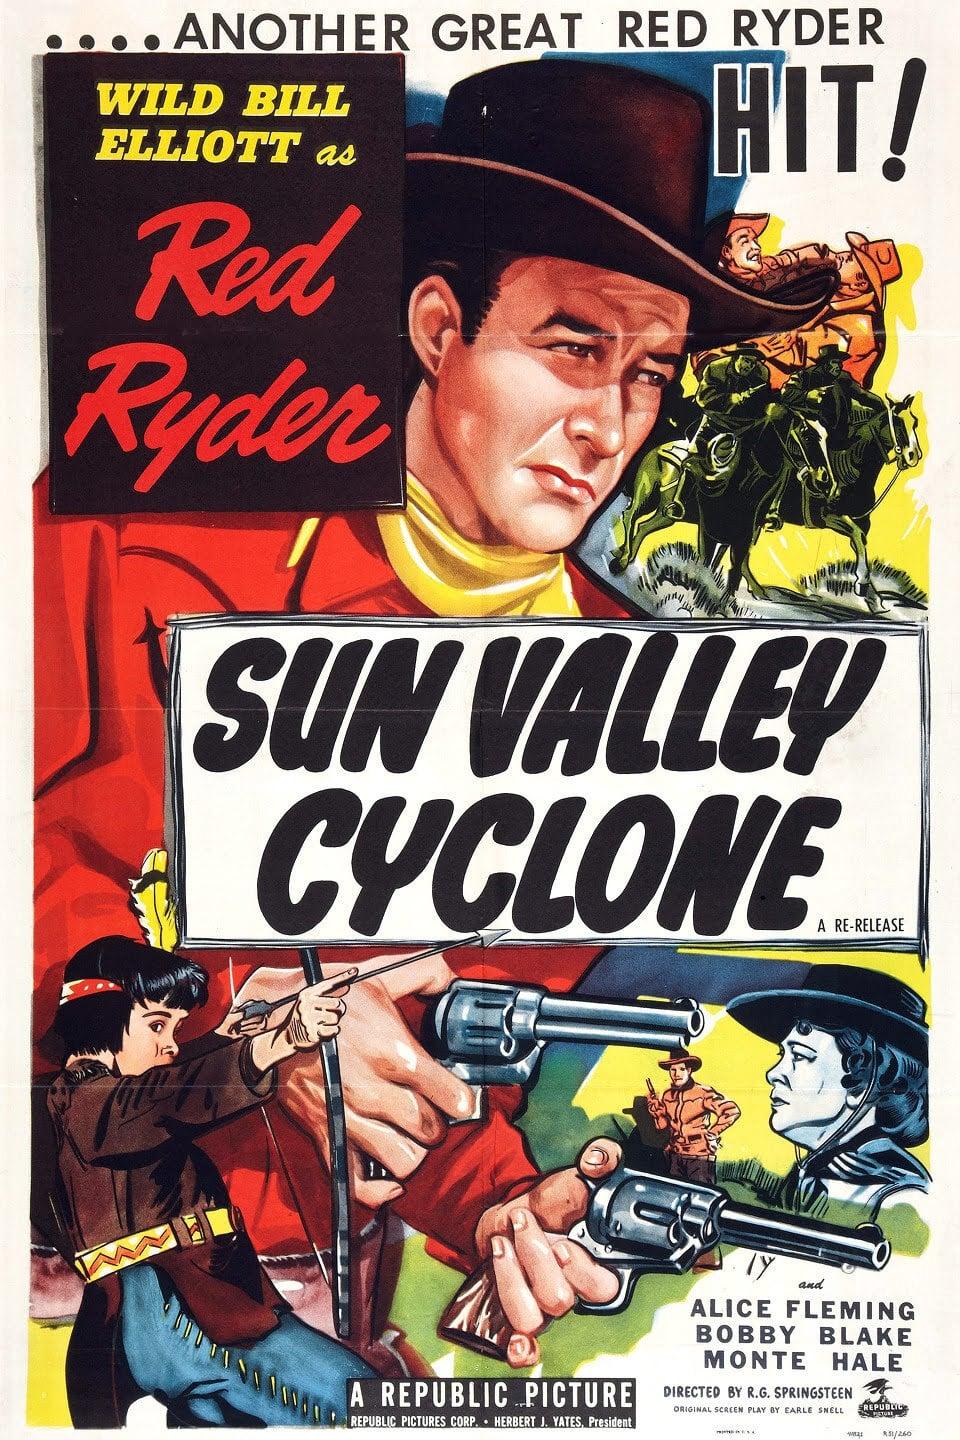 Sun Valley Cyclone poster